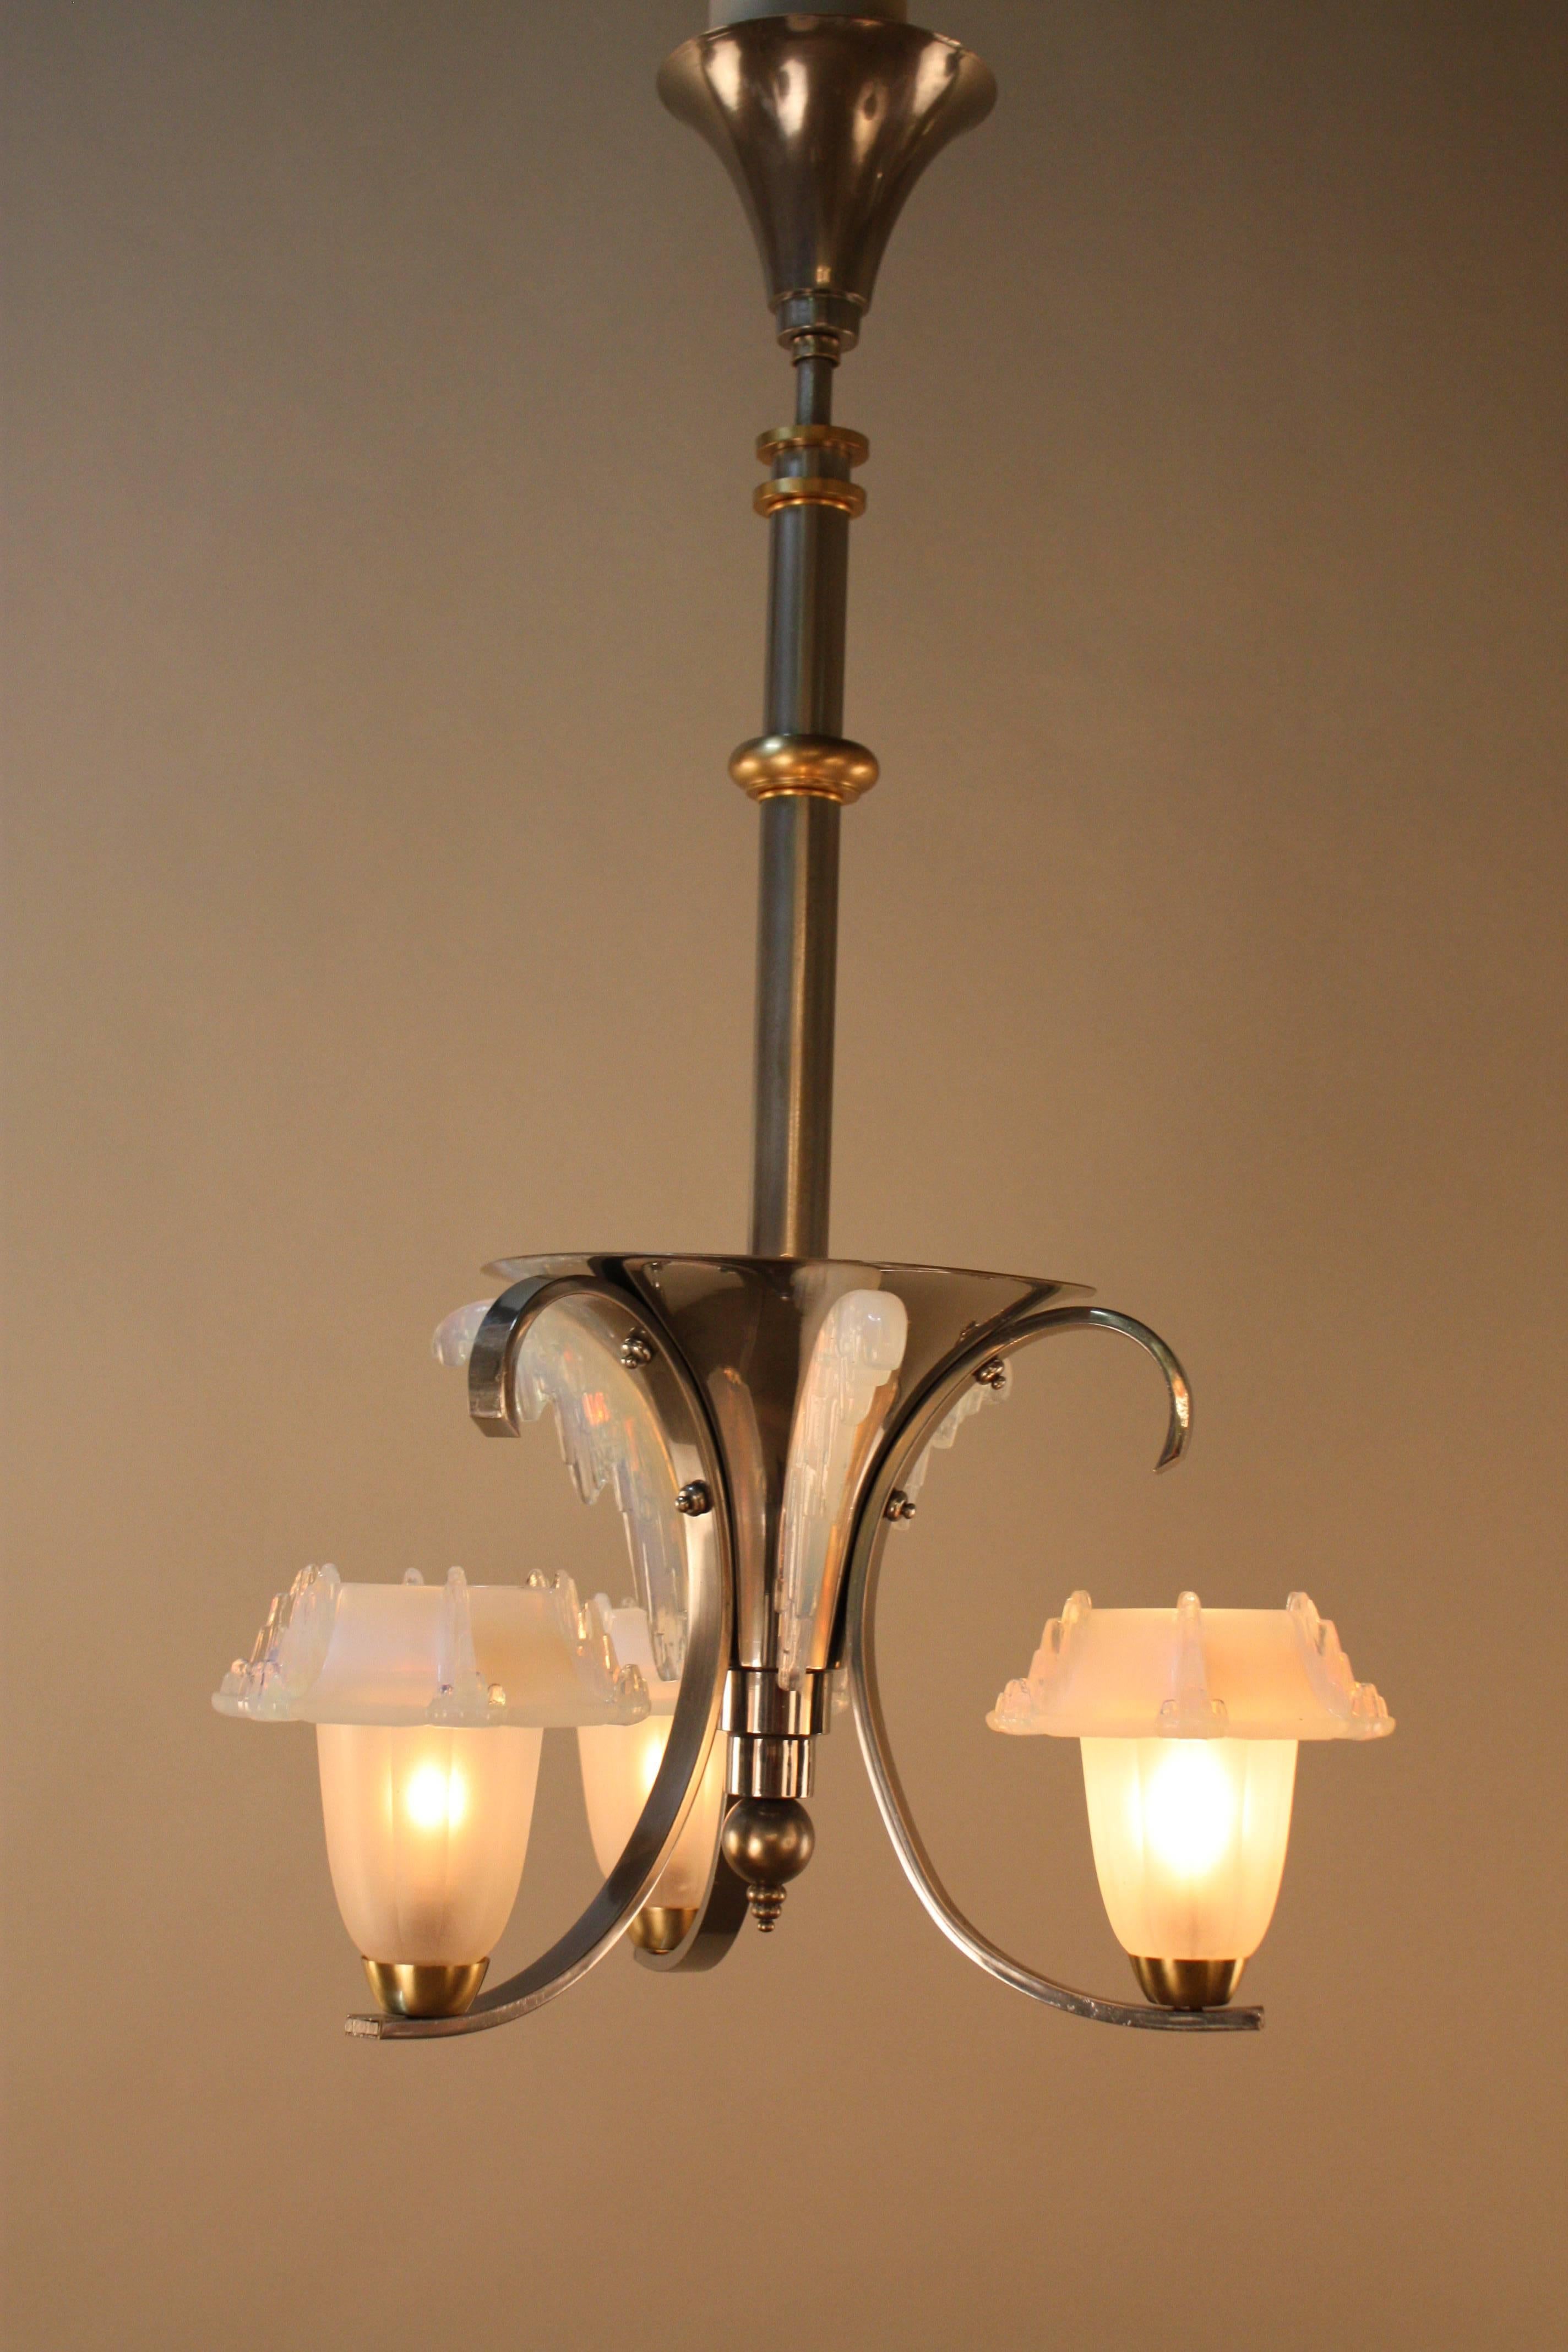 A simply stunning French Art Deco chandelier with opalescent glass shade. This chandelier has original chrome on bronze finish with some bronze accent pieces.
Total of five lights 60 watt each.